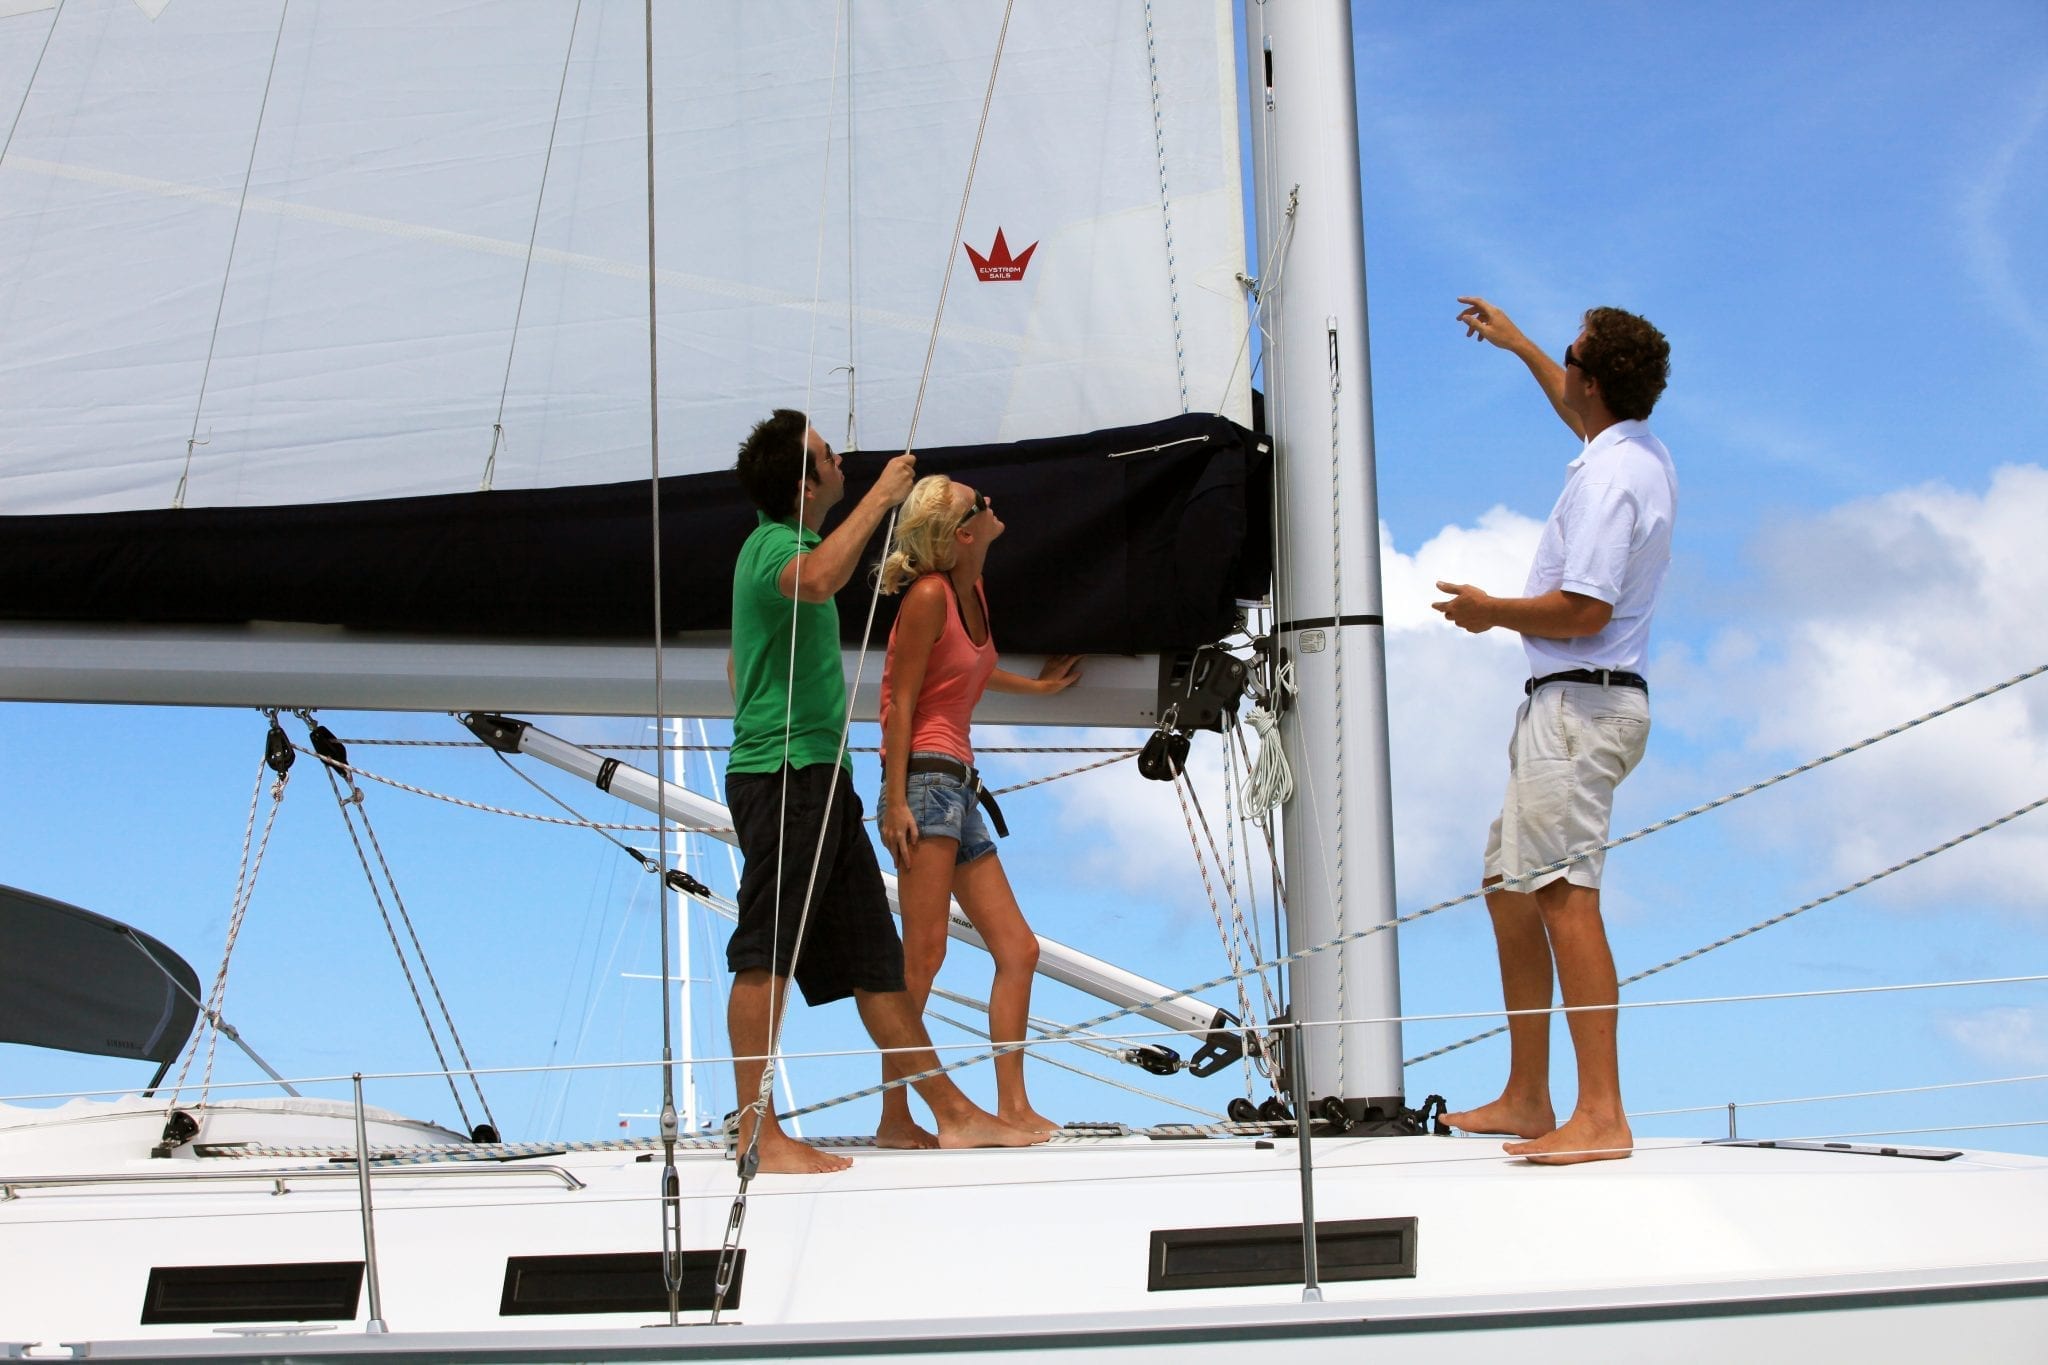 Learn to sail in the Caribbean with Horizon Yacht Charters